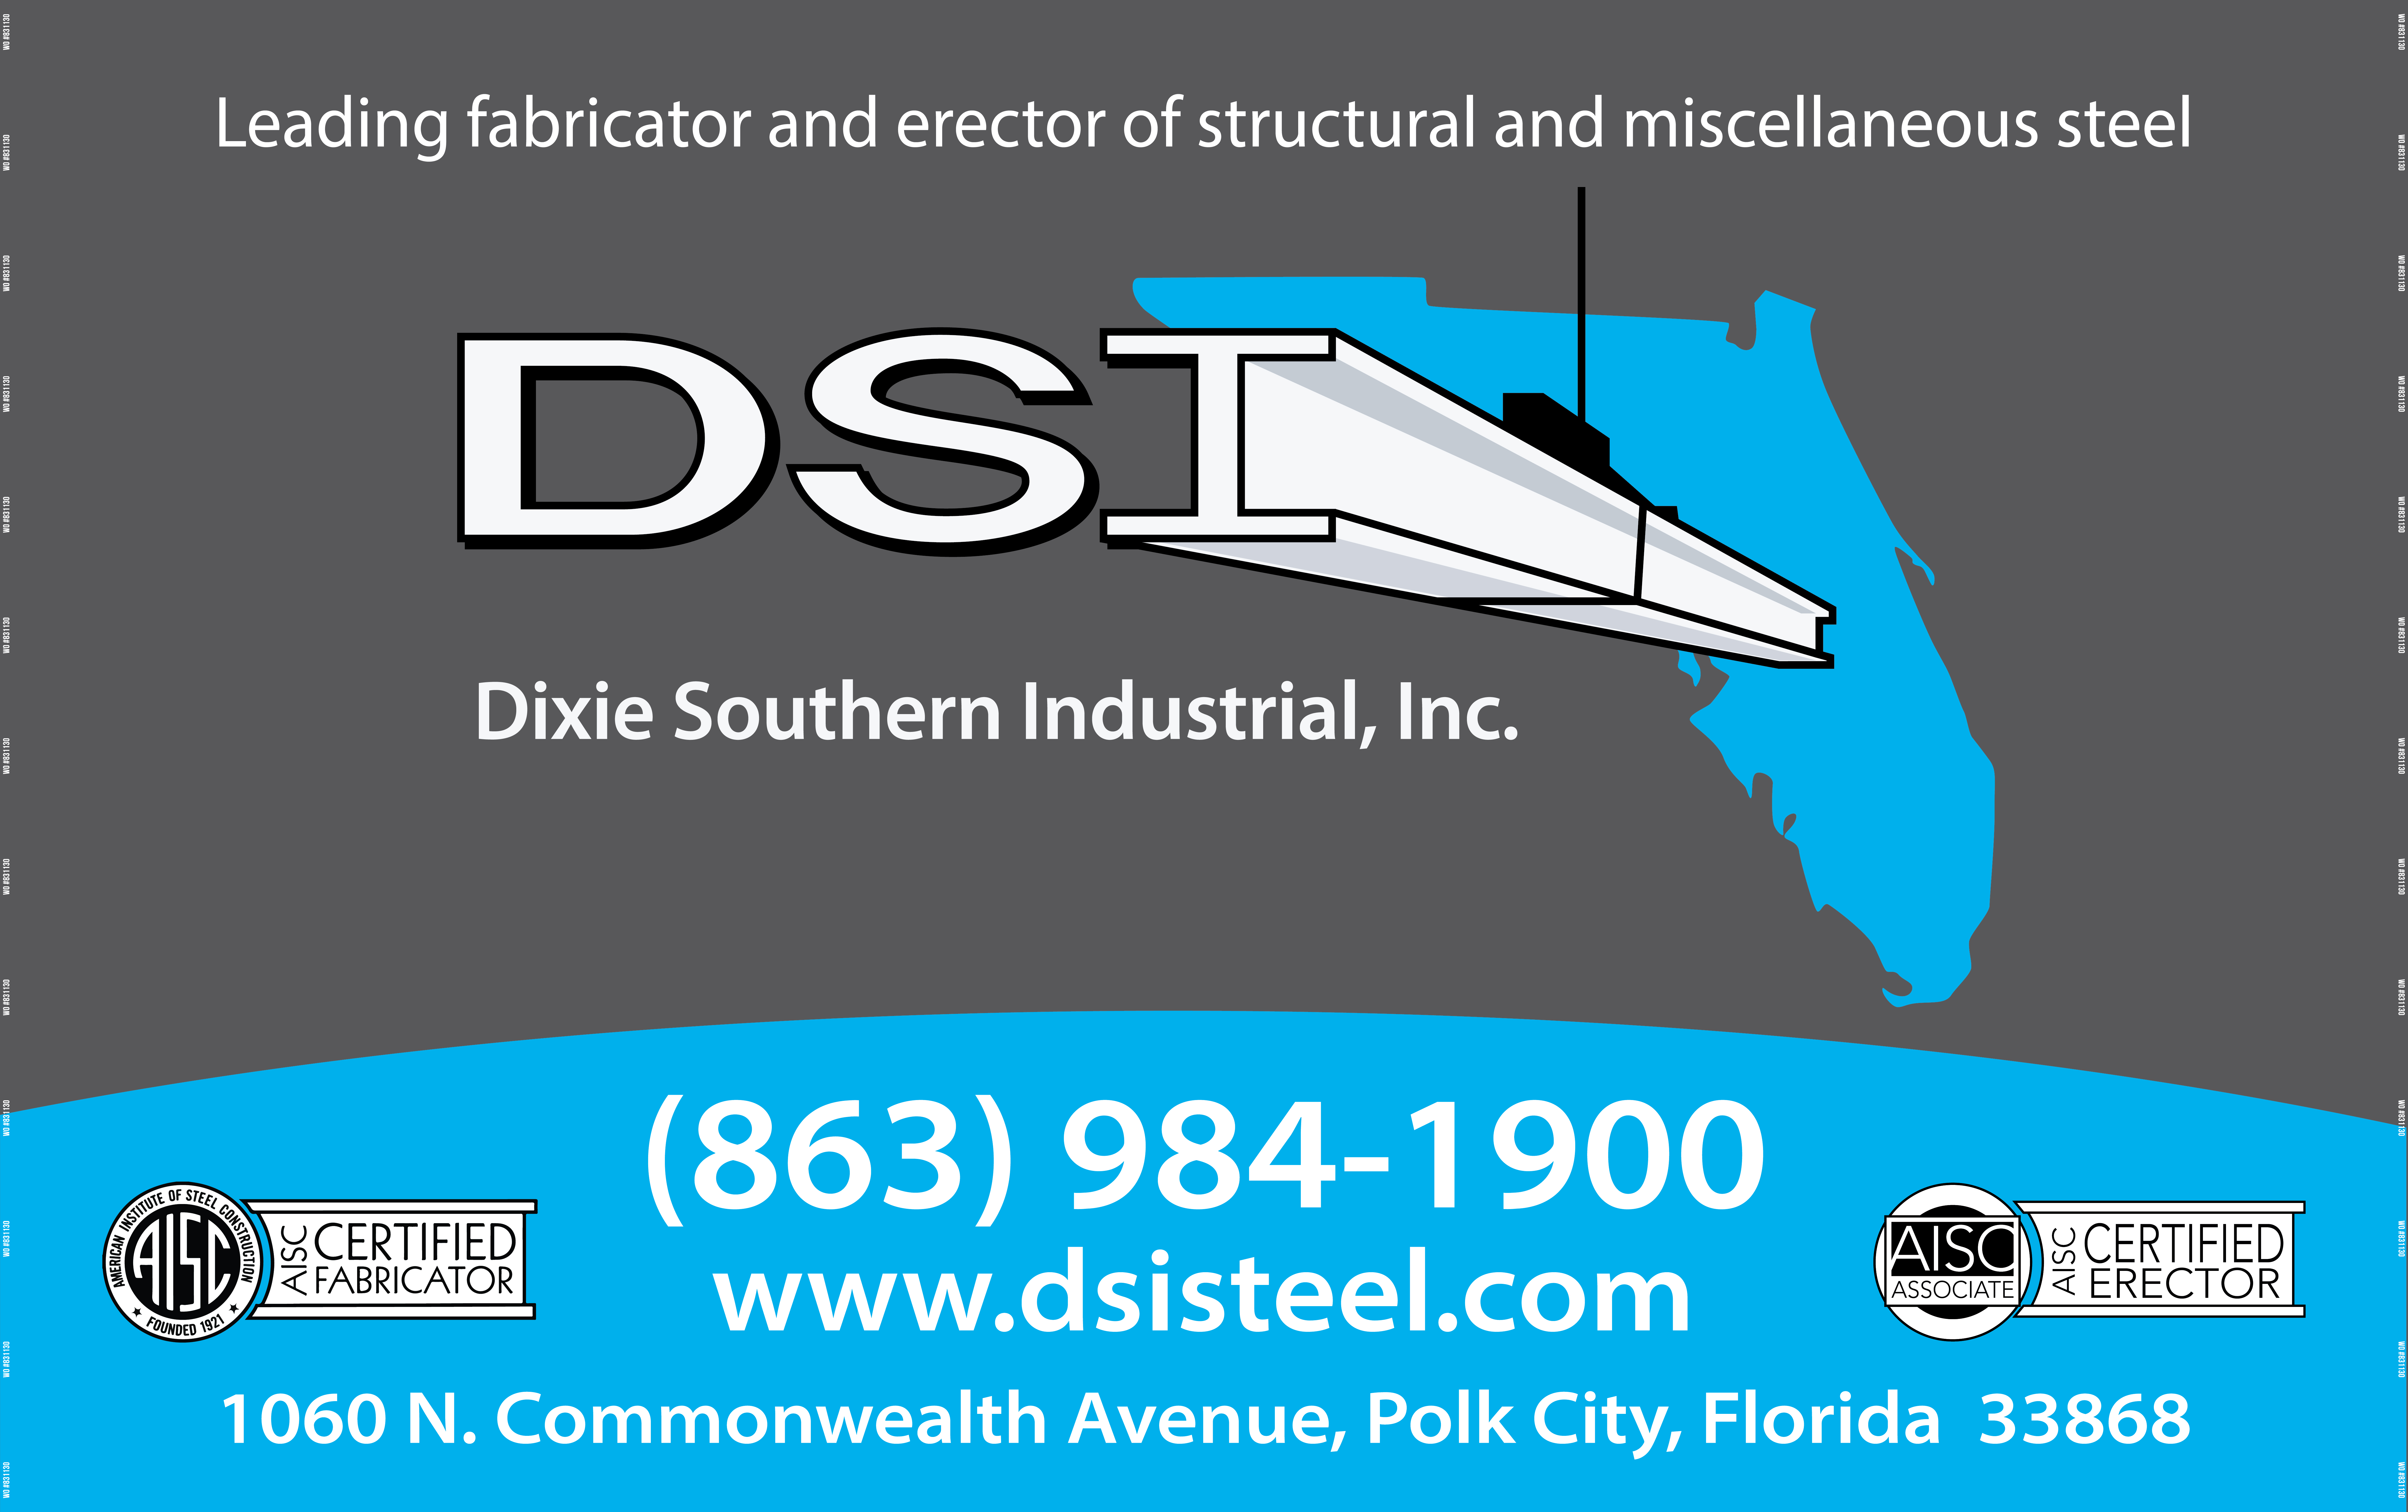 Dixie Southern Industrial